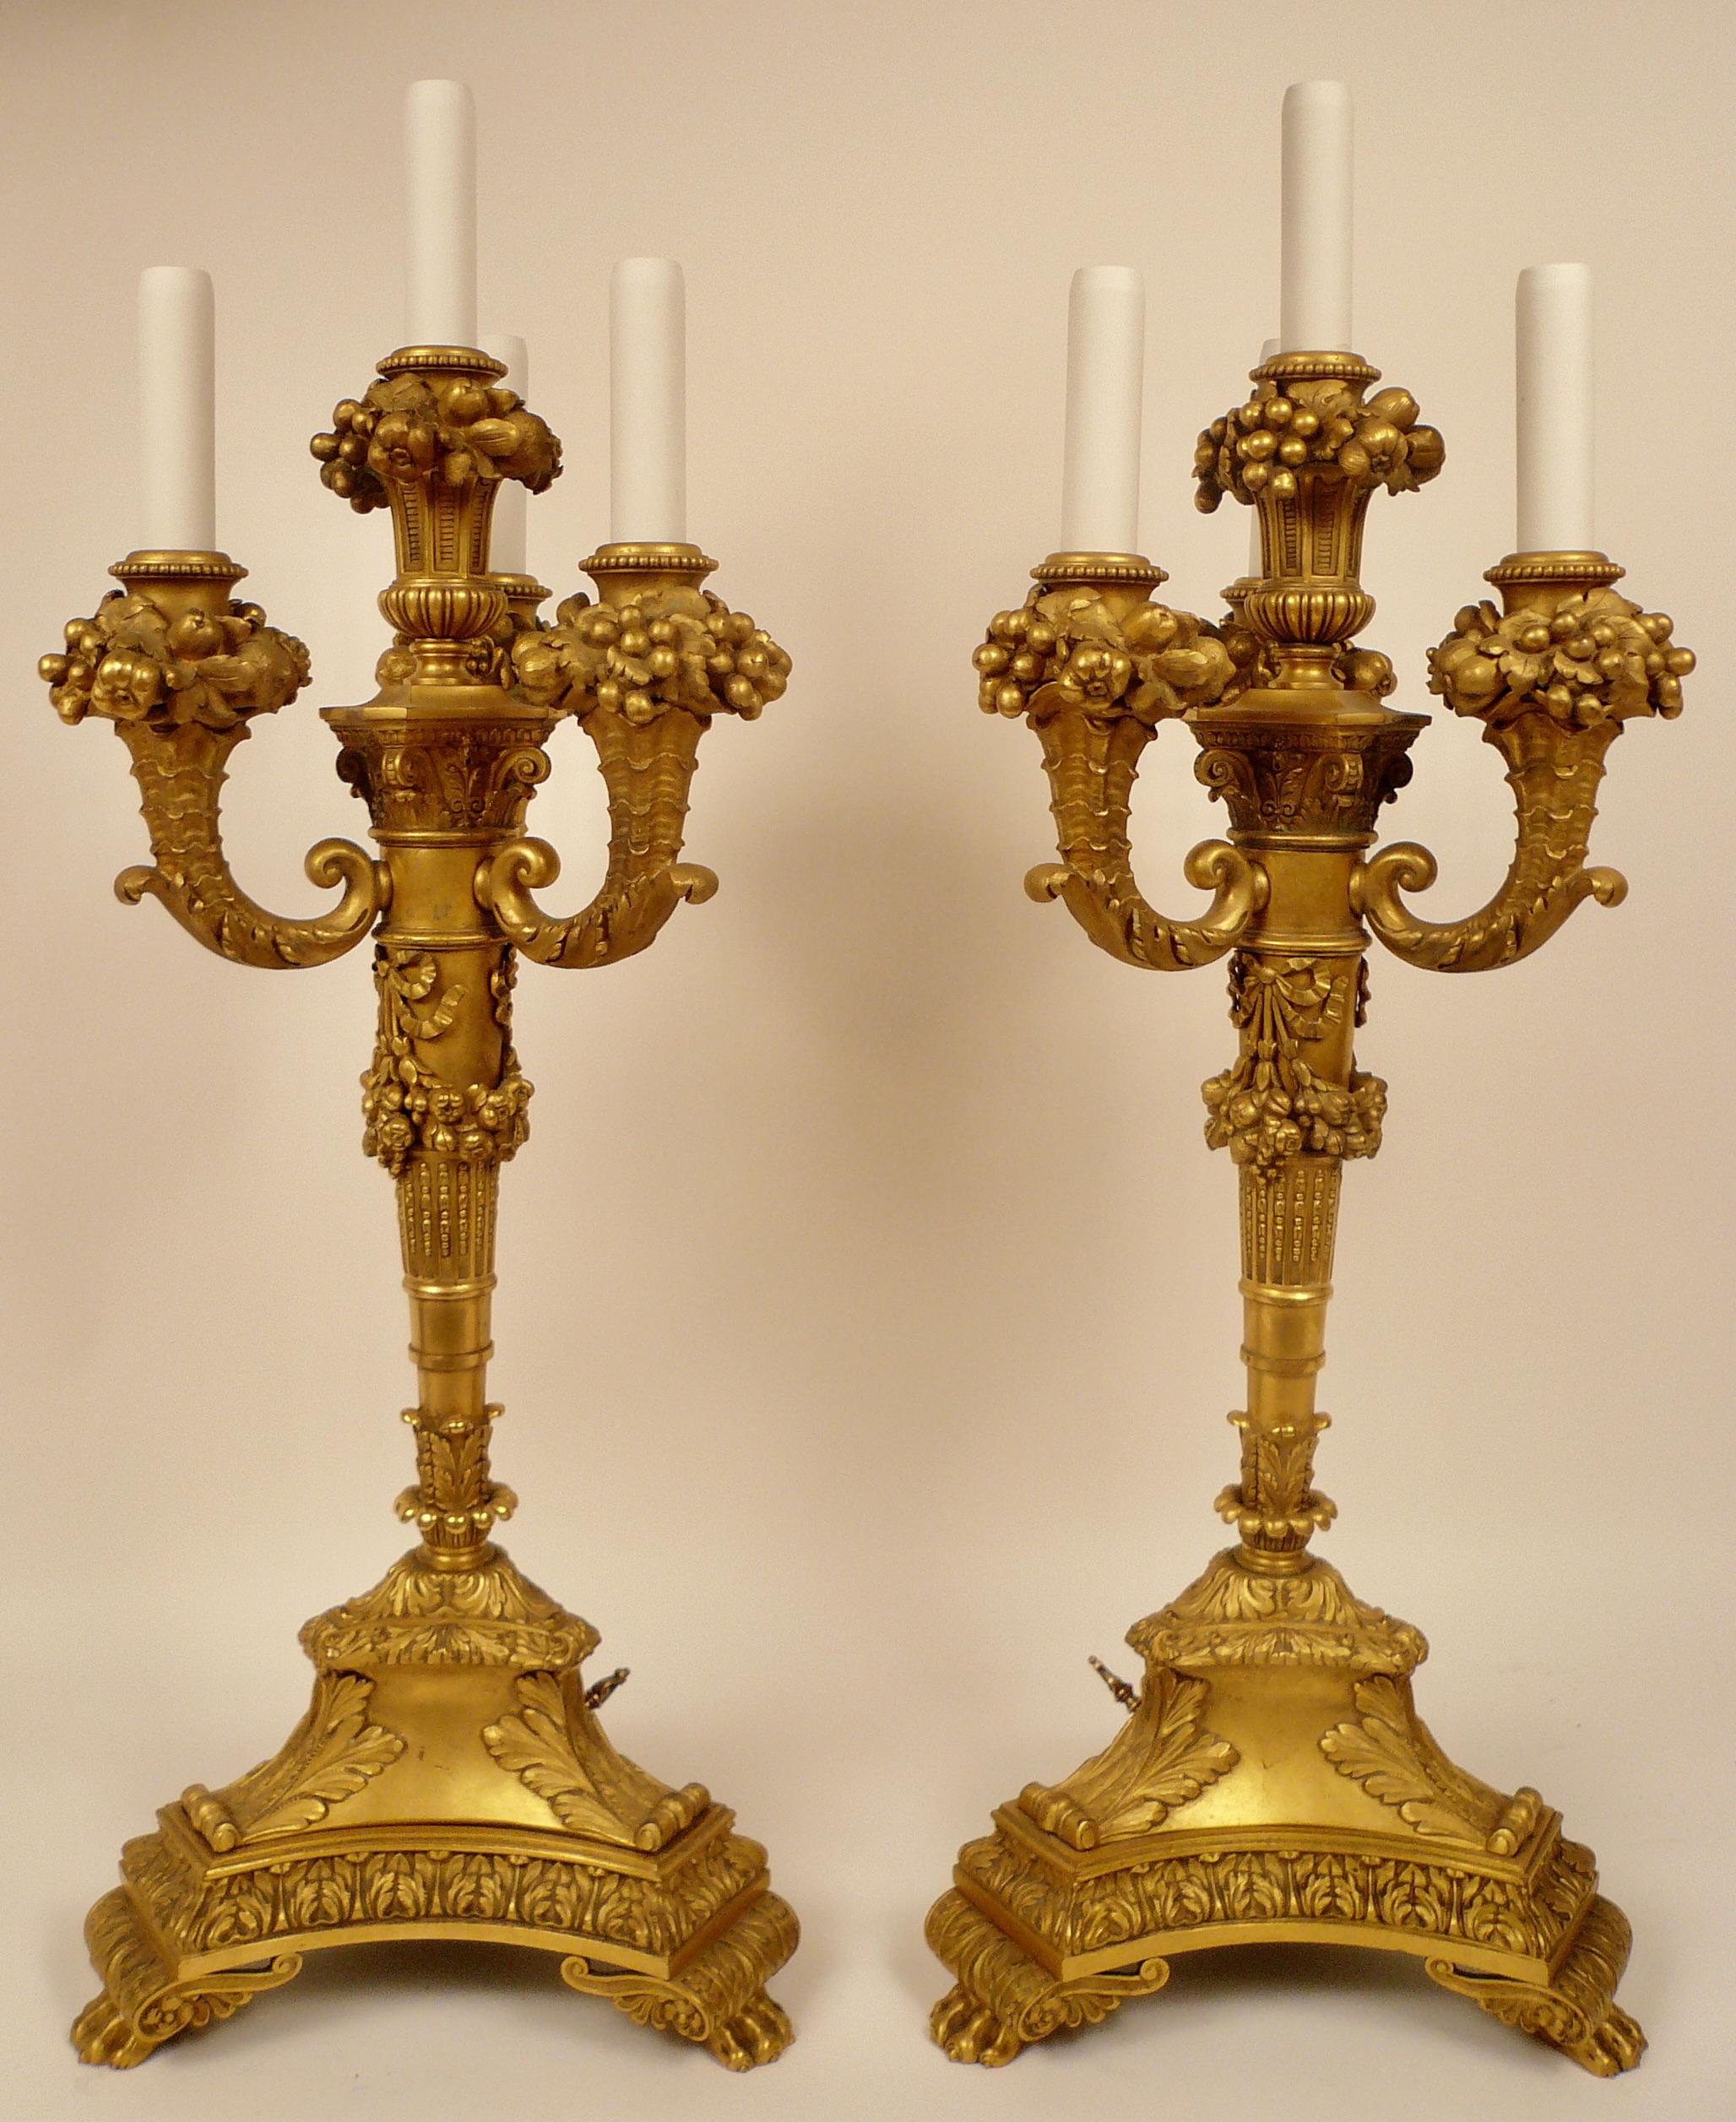 This impressive pair of Louis XVI style gilt bronze candelabra are signed by the famous maker E.F. Caldwell. they retain their original gilt finish and porcelain candles!